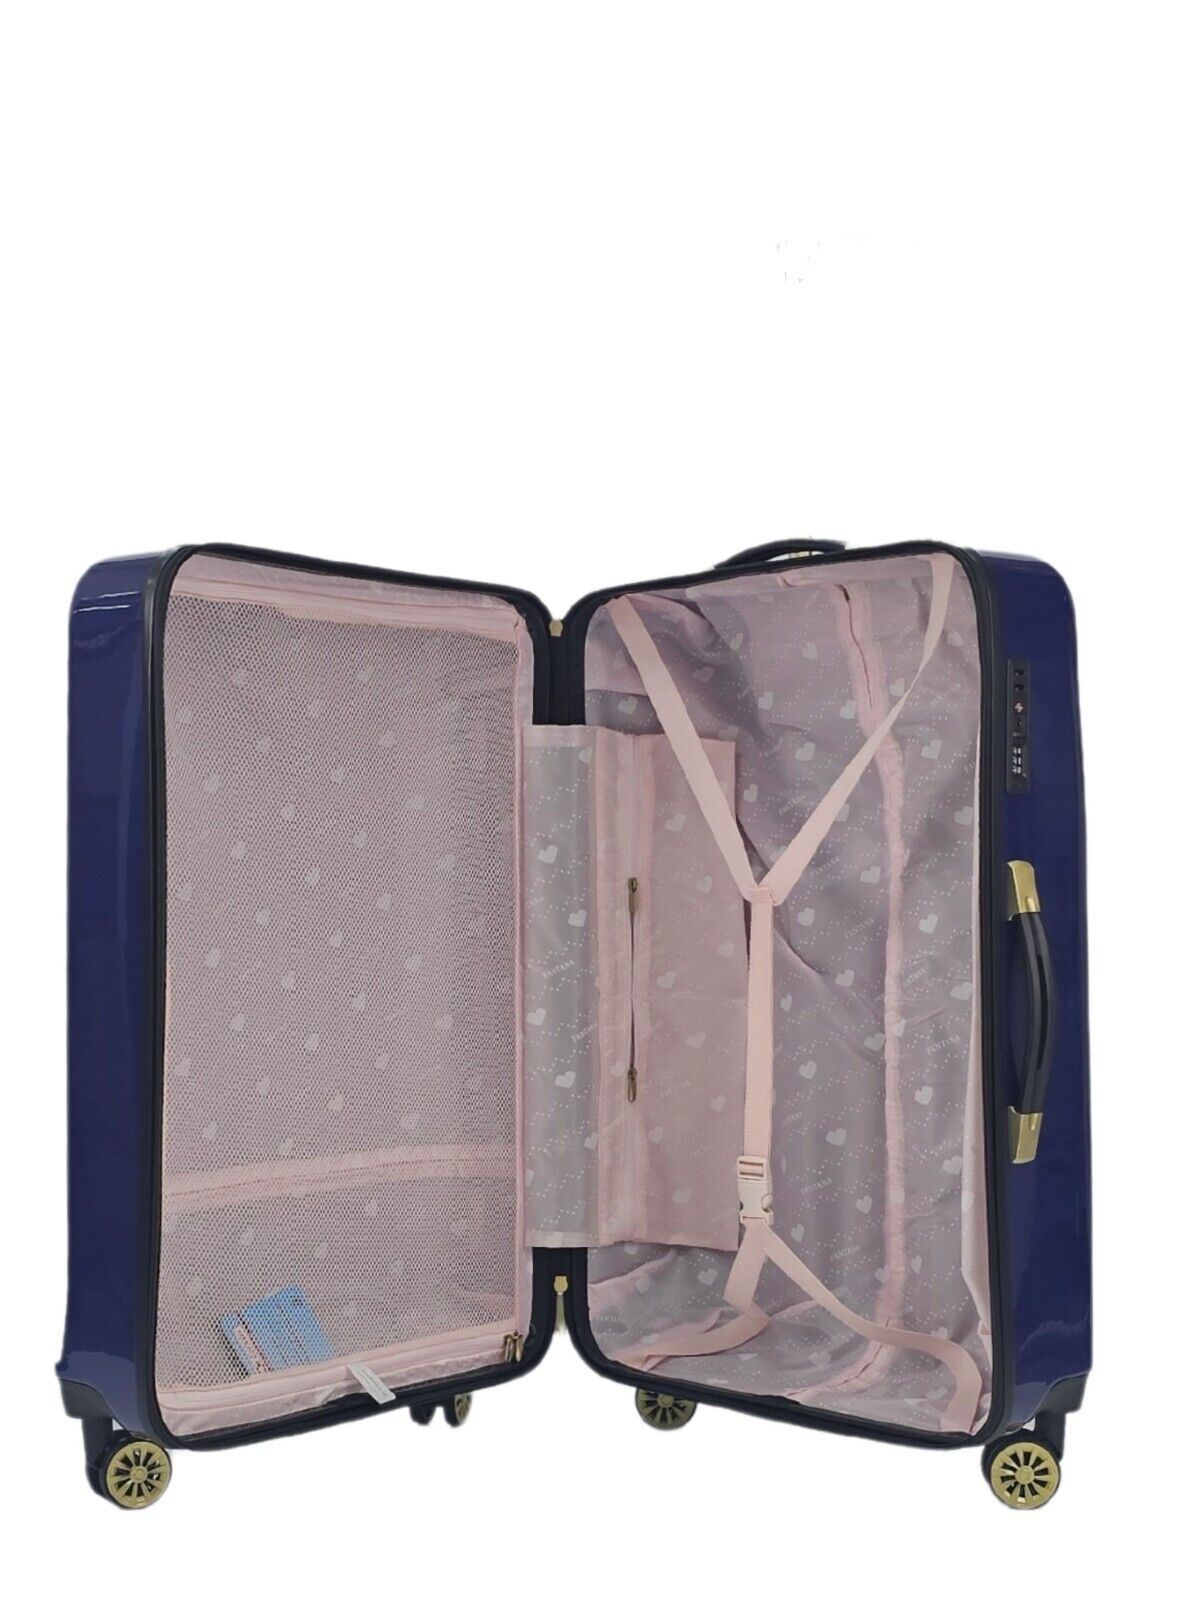 Butler Large Hard Shell Suitcase in Blue